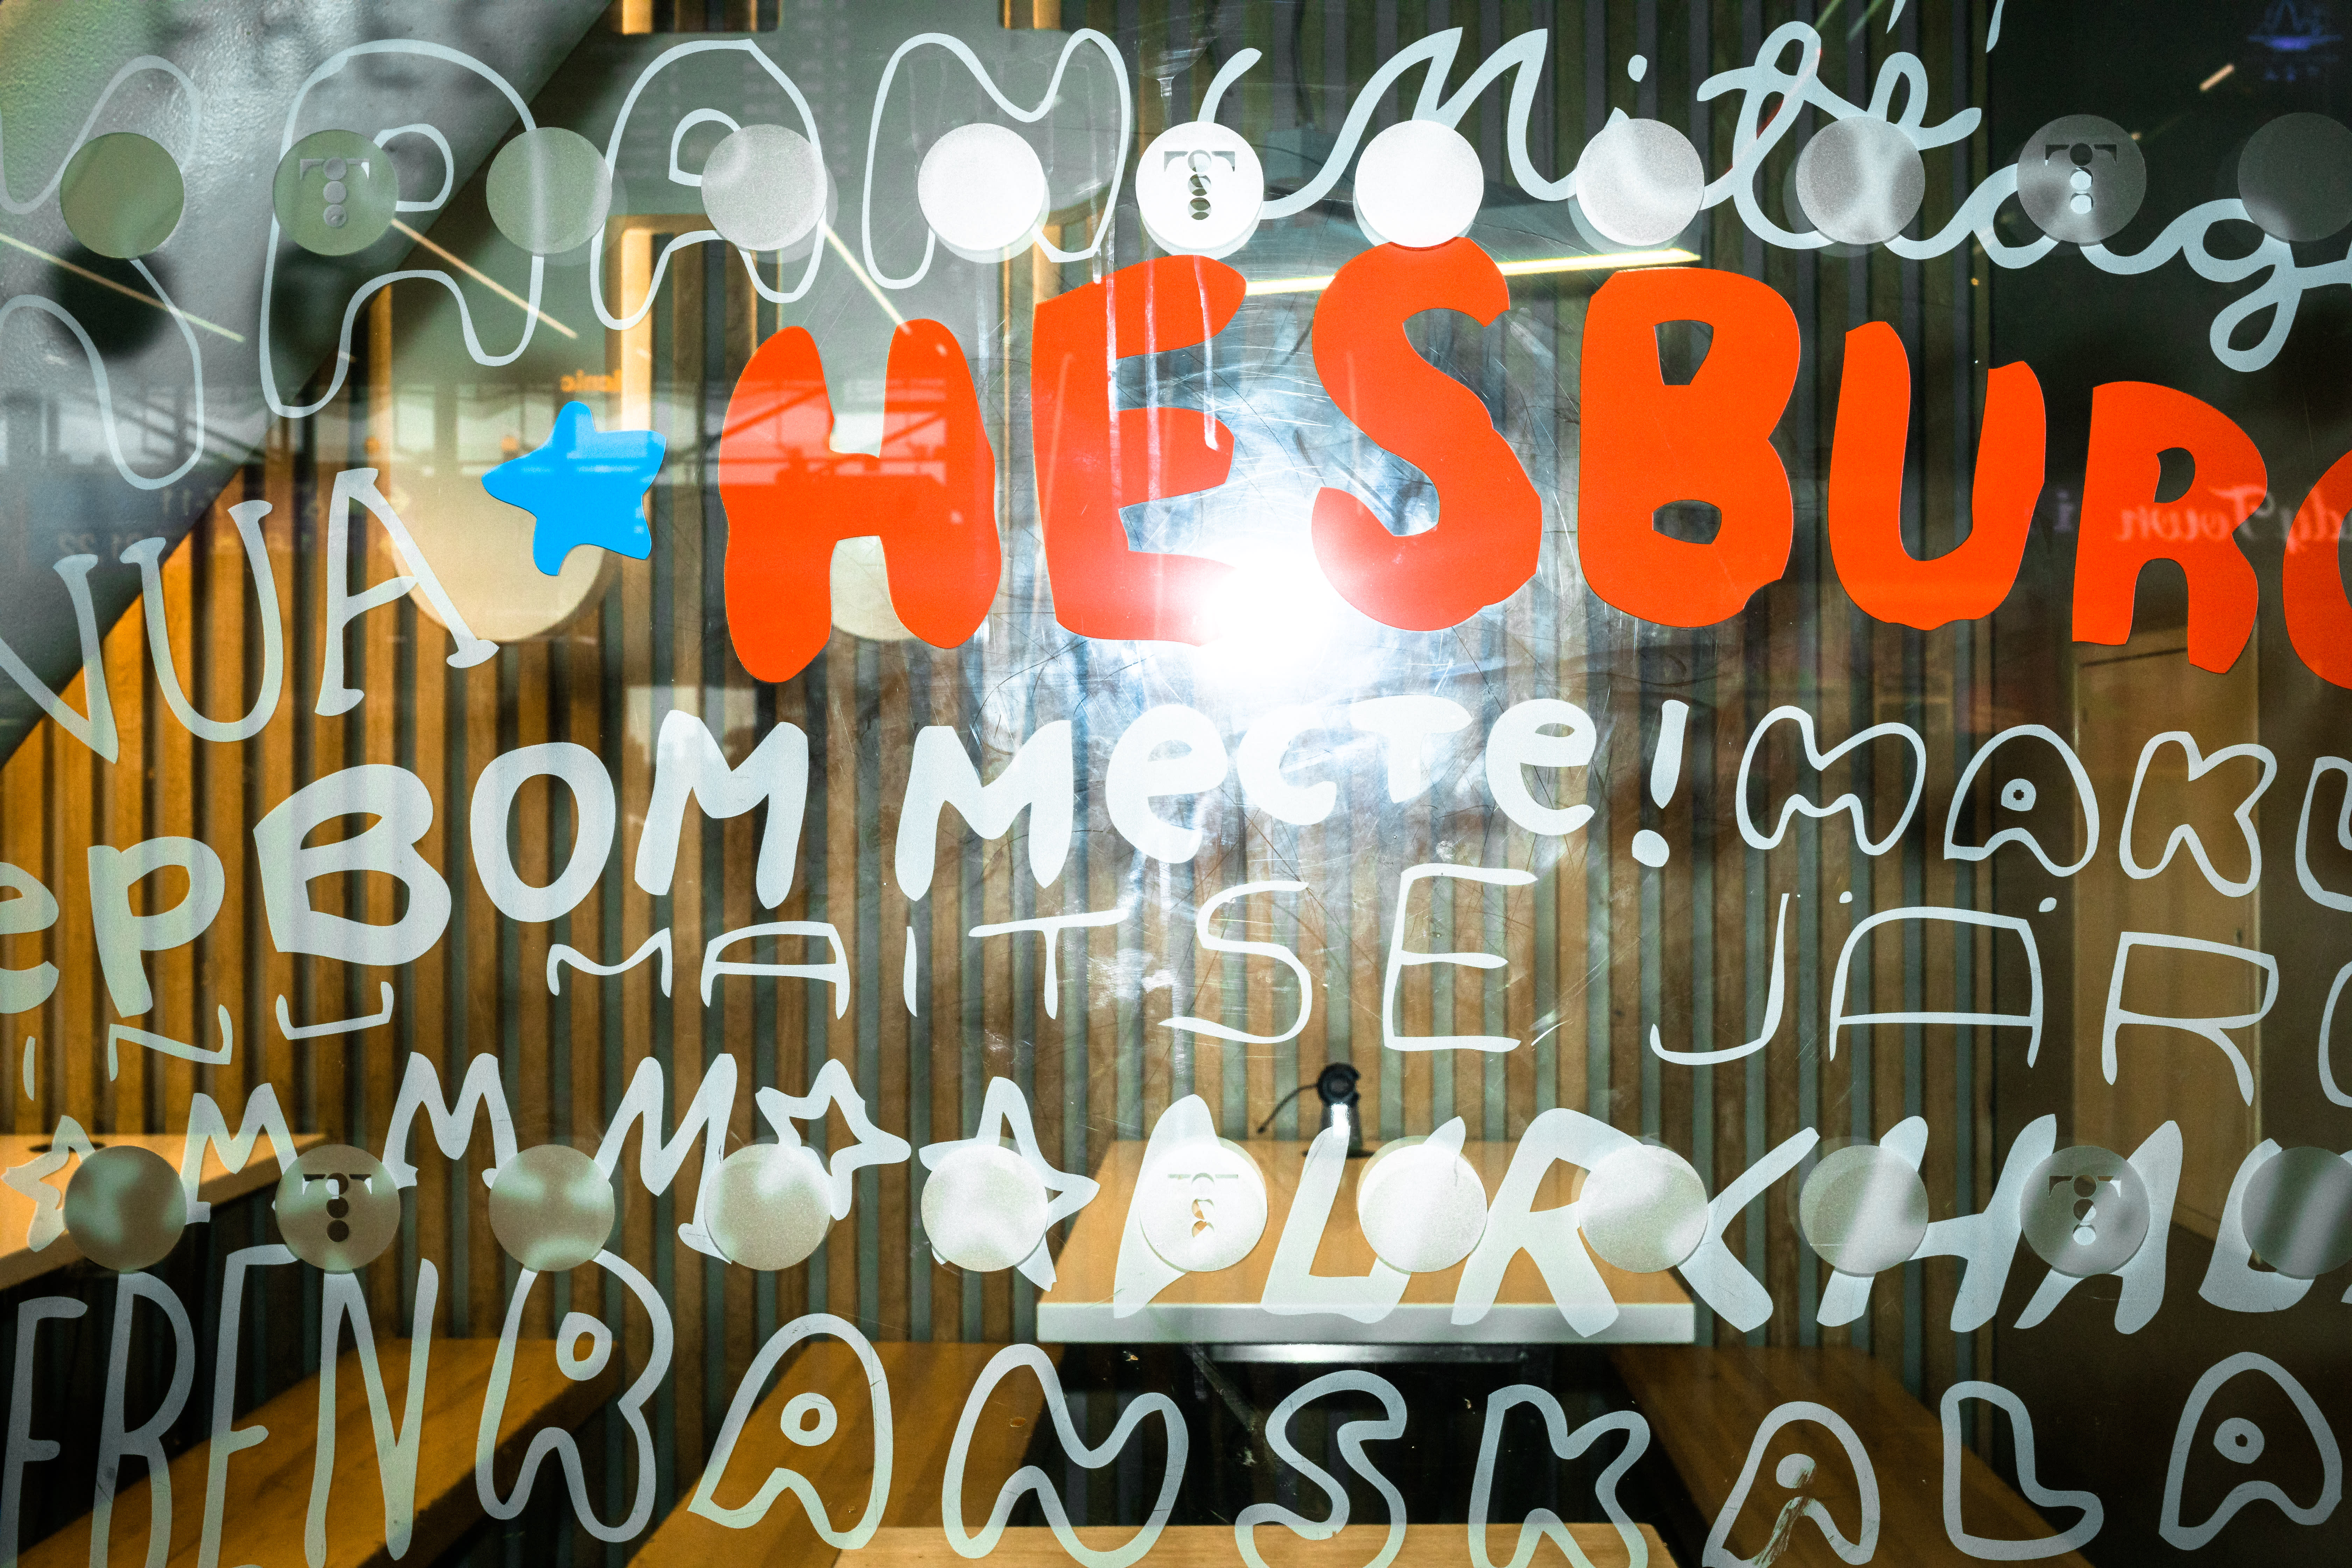 Hesburger will close all offices in Russia and Belarus this week